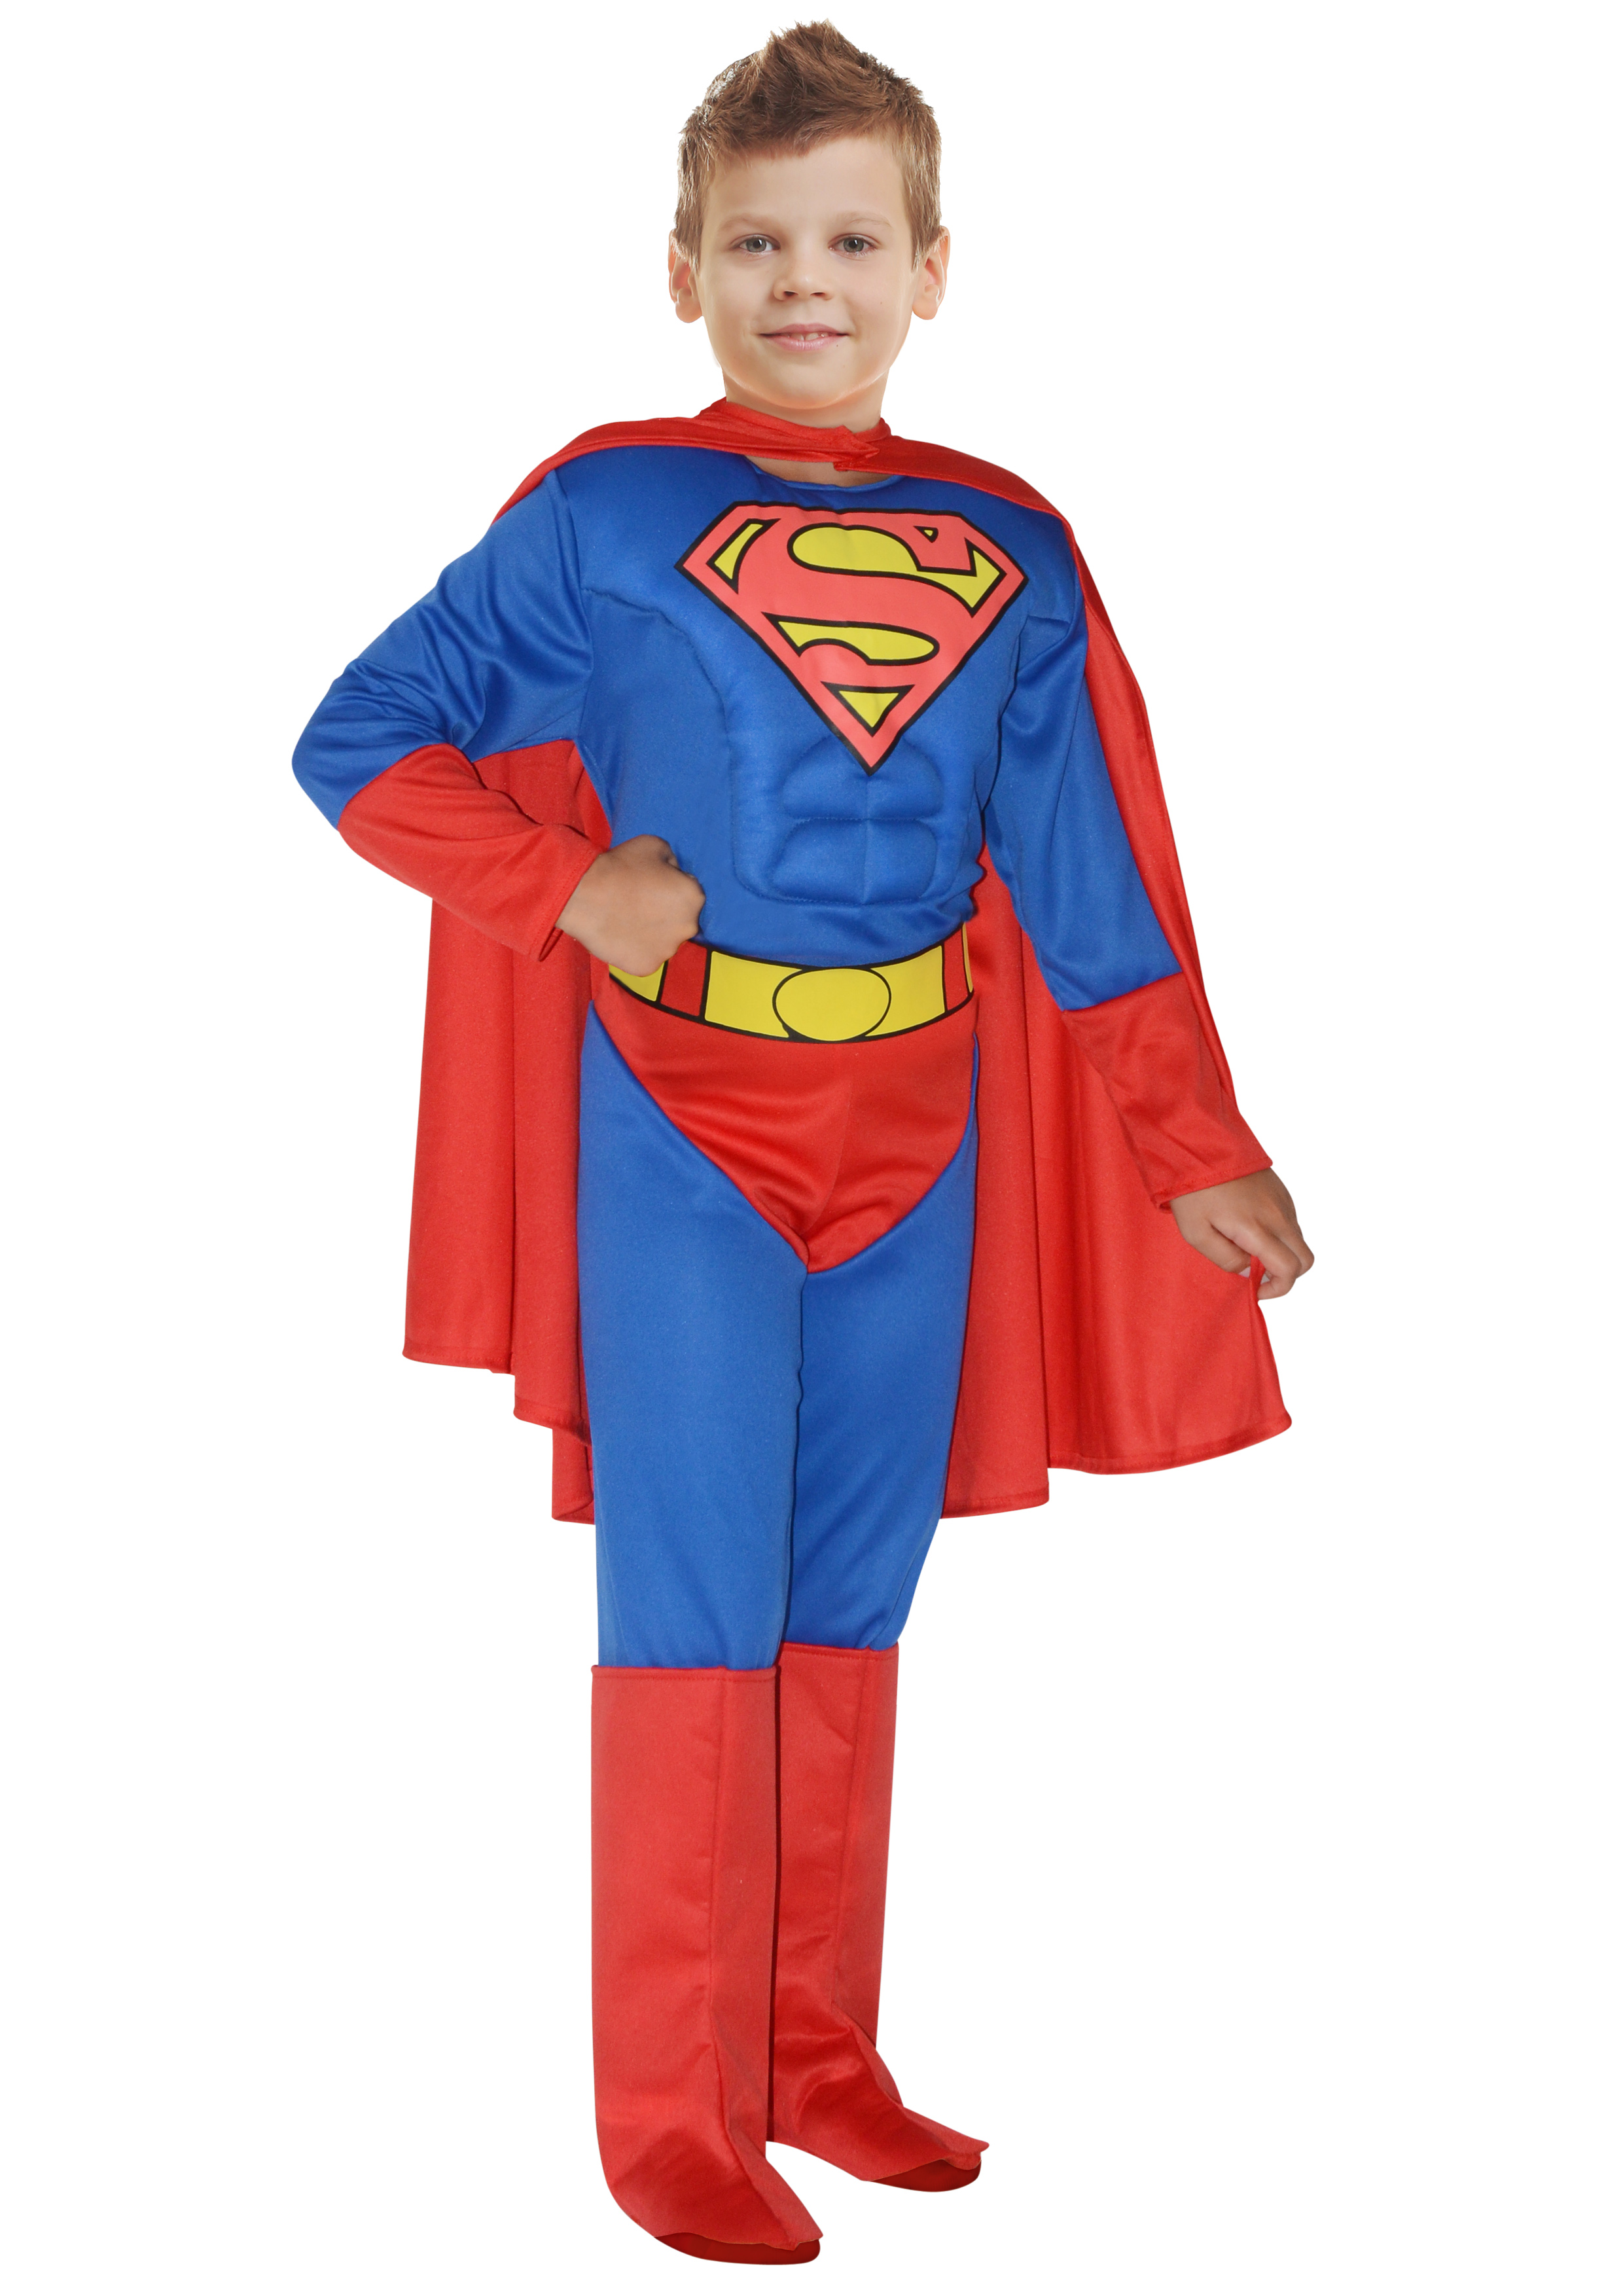 Superman Muscles for Kids (10-12 years)